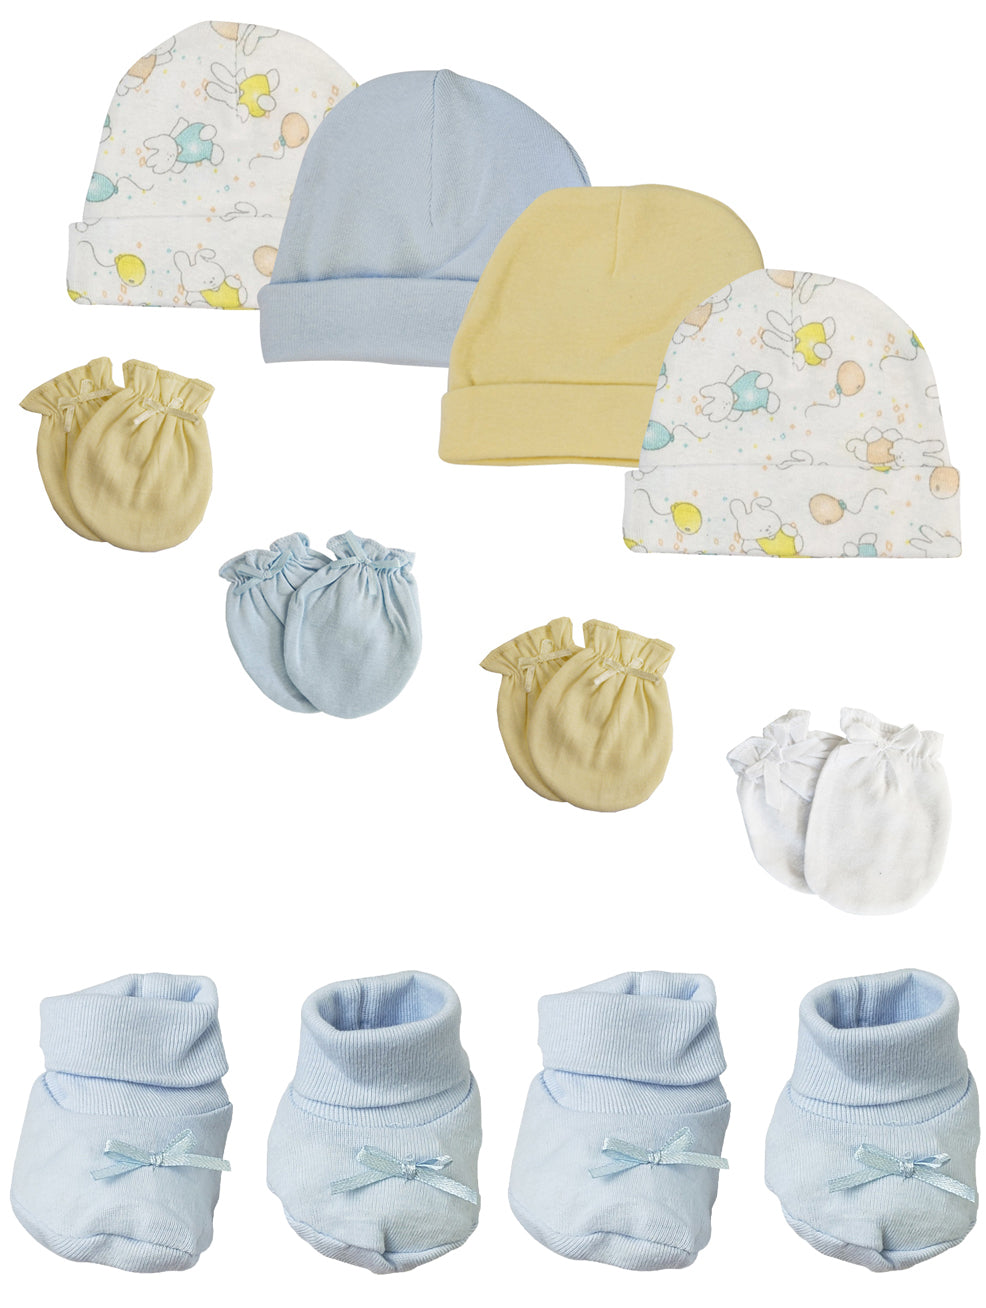 Preemie Baby Boy Caps with Infant Mittens and Booties - 10 Pack NC_0206